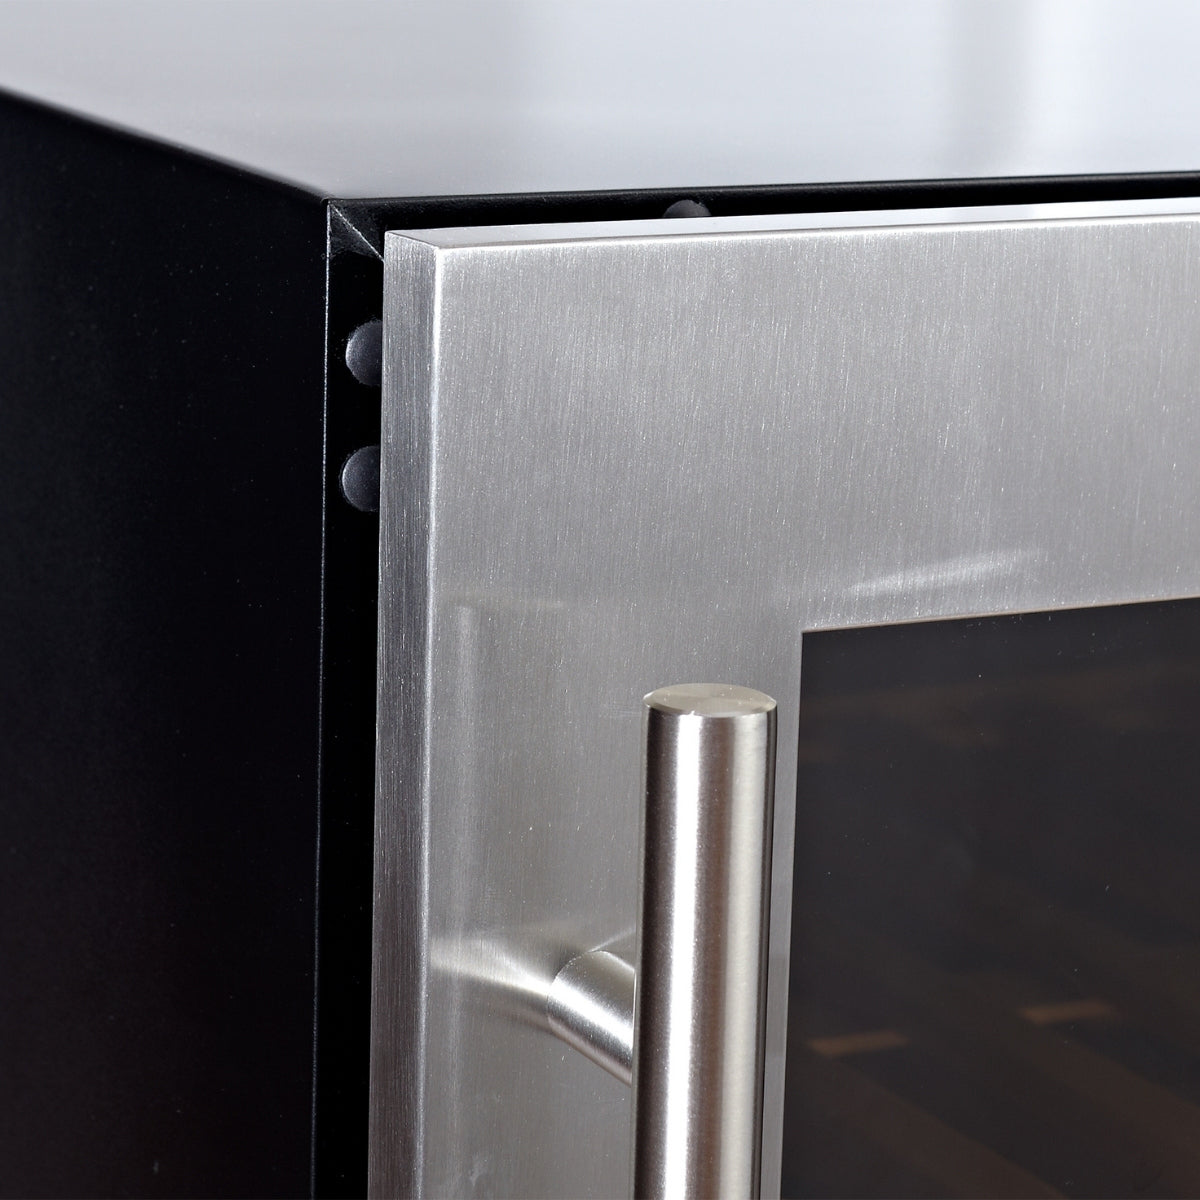 A close-up of a black and silver cabinet with a borderless black glass door, showcasing the Kings Bottle Upright Wine & Beverage Cooler Combo With Low-E Glass.